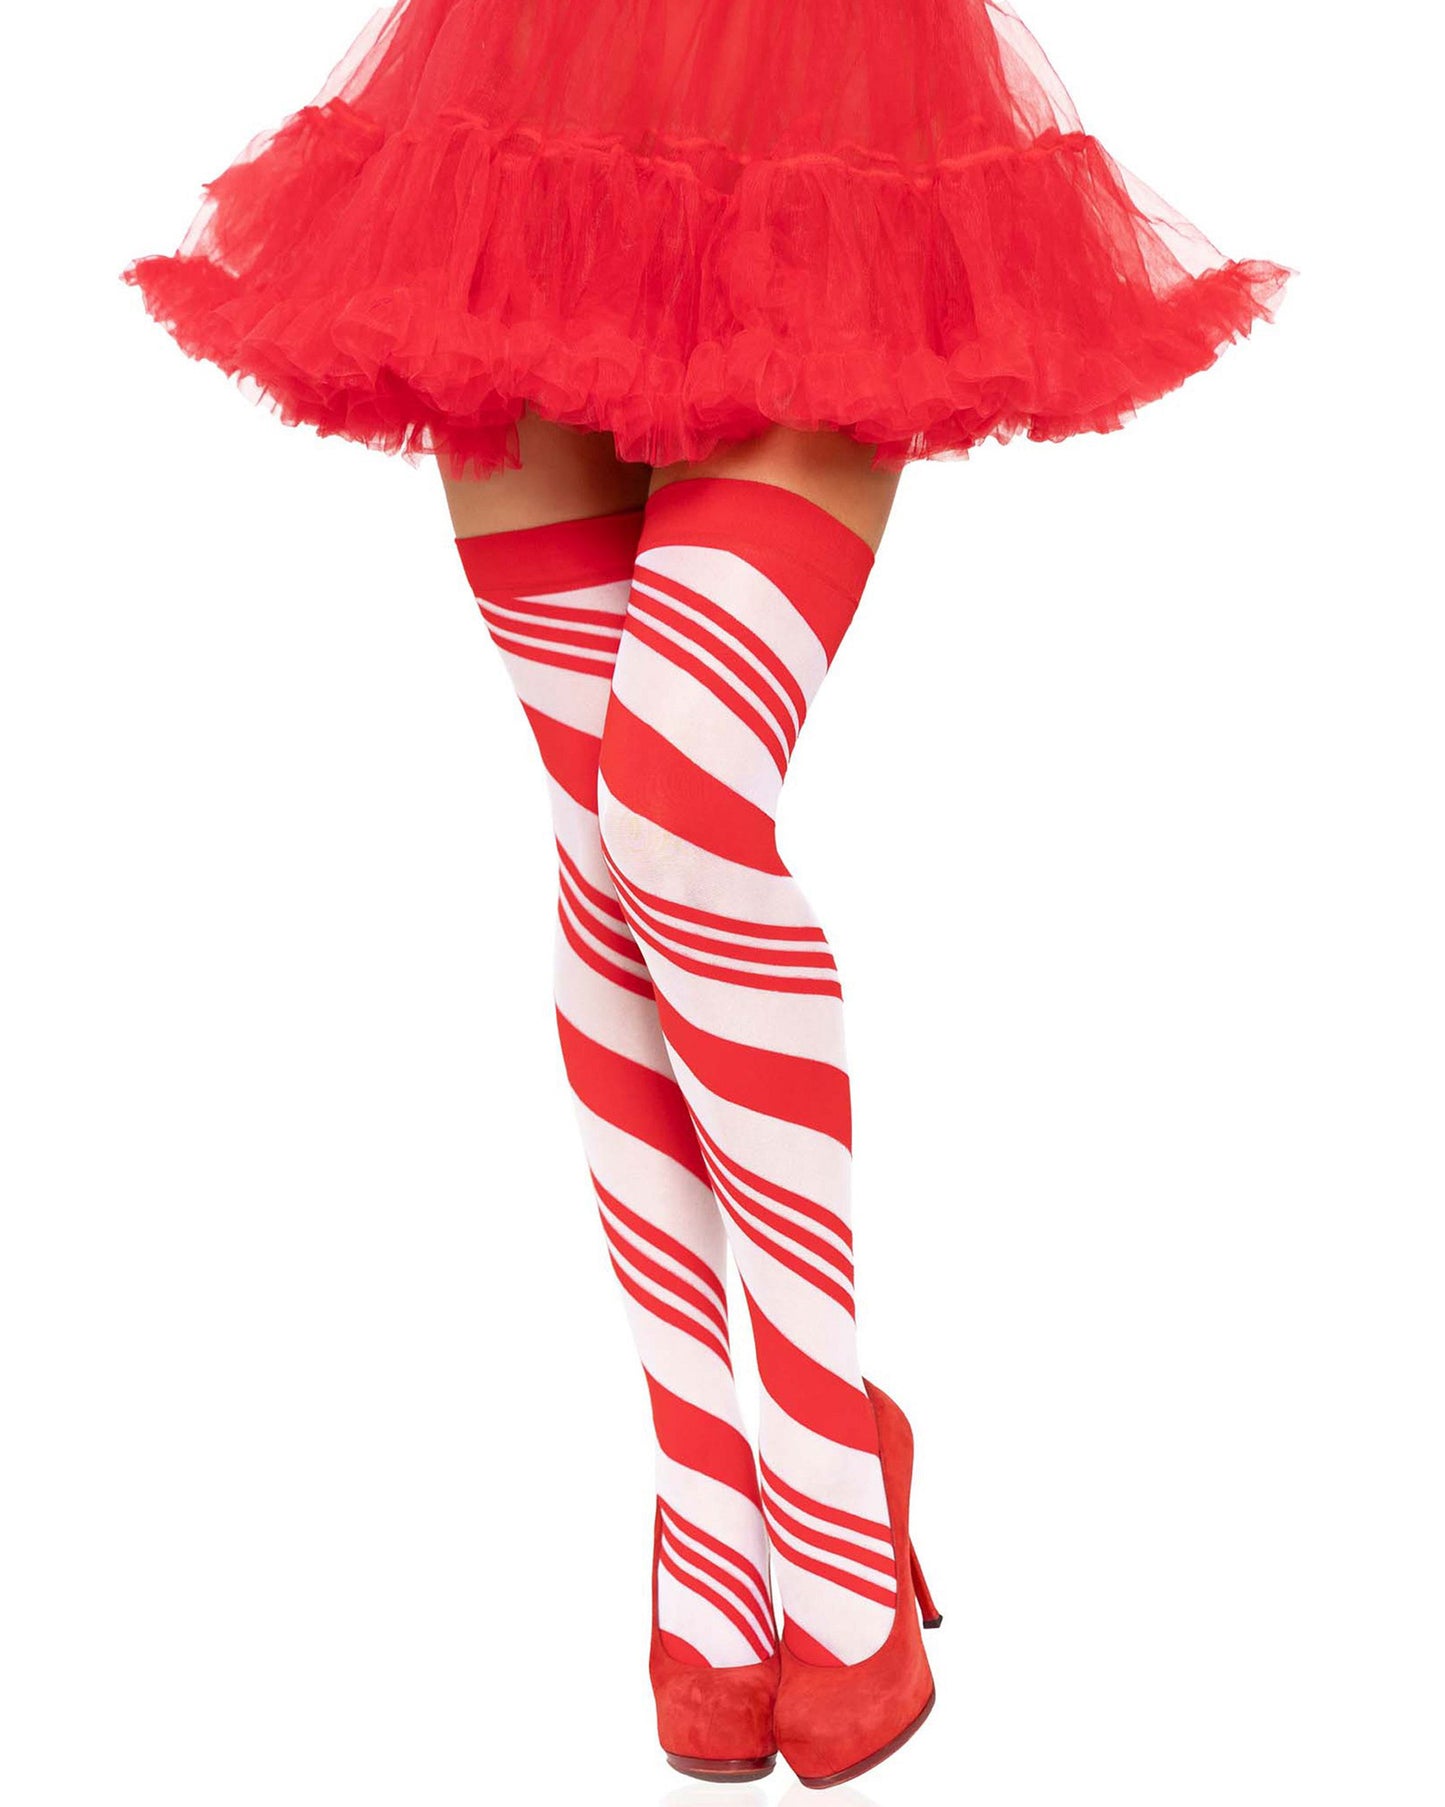 Leg Avenue 6628 Candy Cane Stockings - White opaque thigh high socks with a swirling candy cane style stripe wrapping diagonal around the leg with a plain red elasticated cuff. Worn with red high heel stilettos and red frilly tulle tut-tut skirt